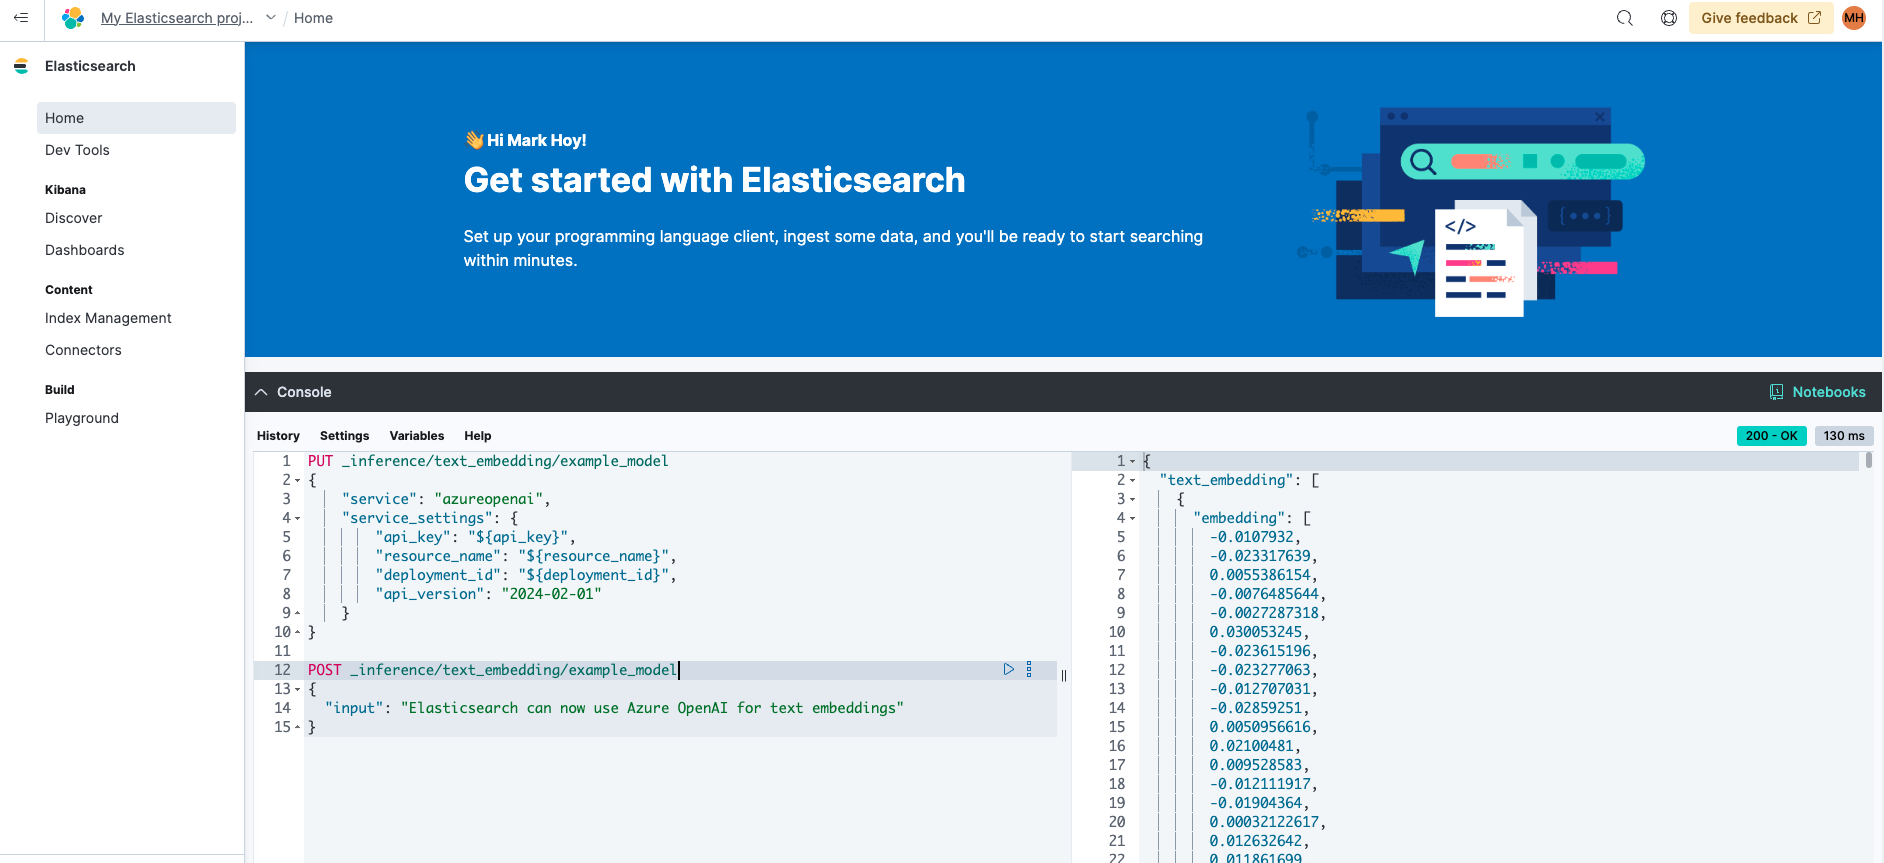 Elasticsearch open inference API adds support for Azure OpenAI embeddings